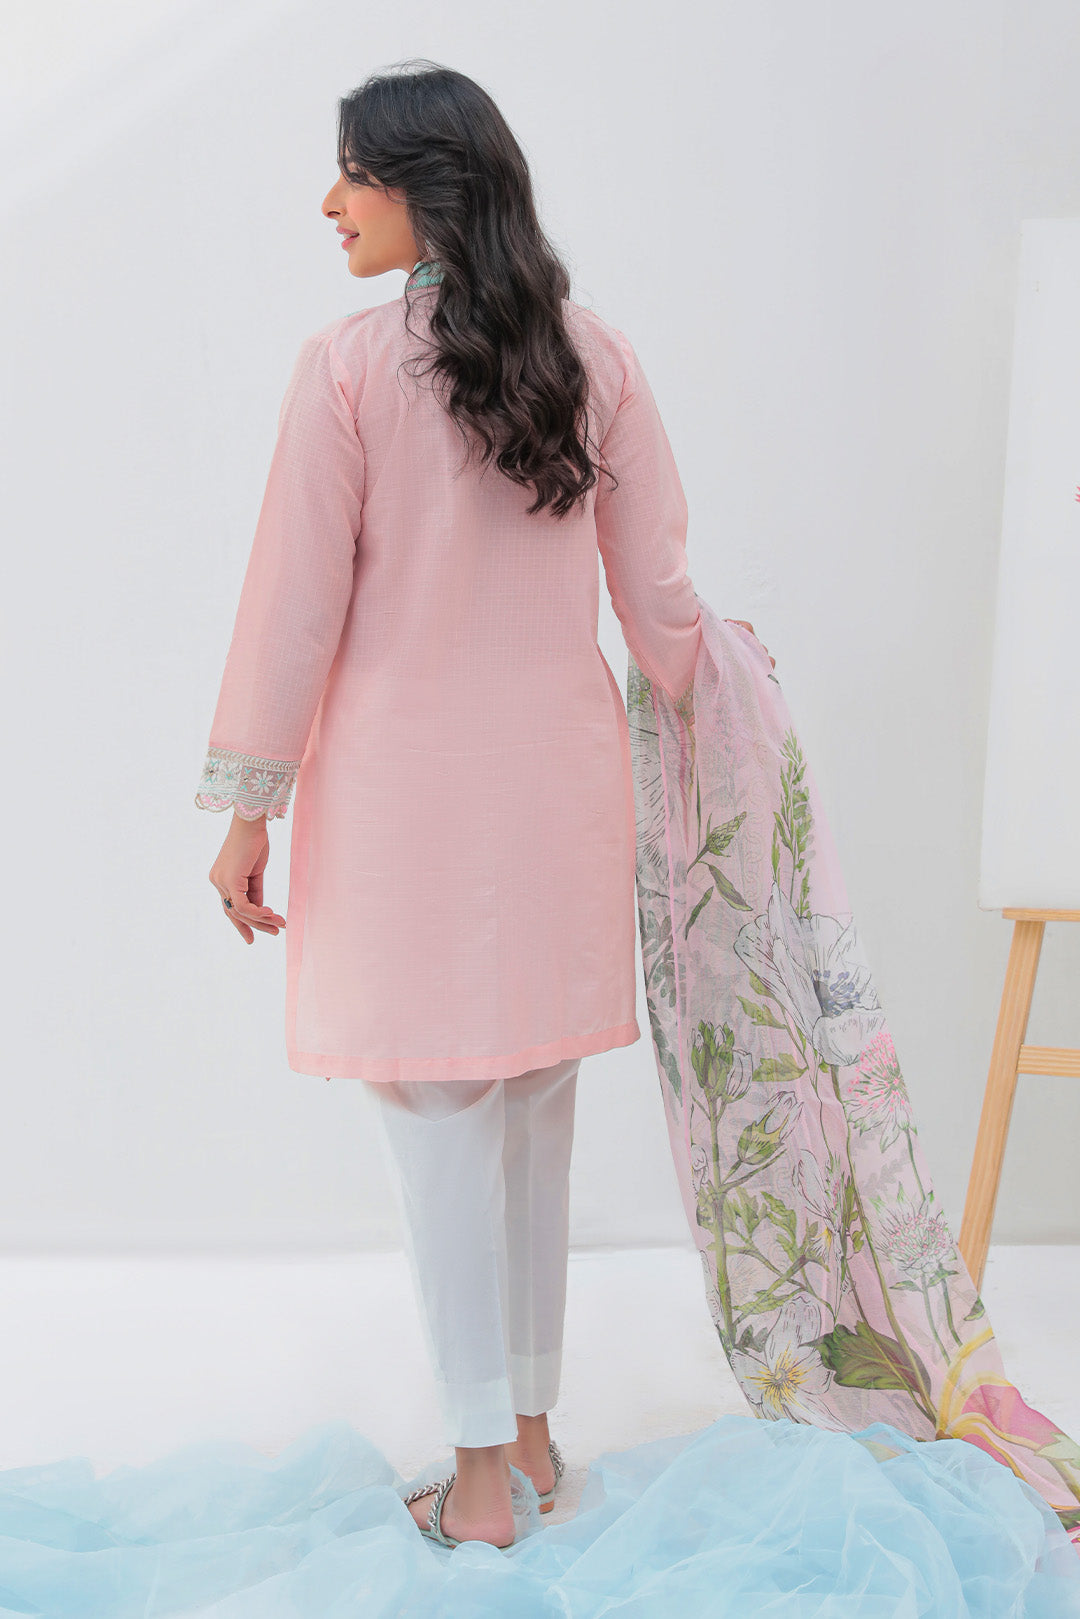 2 Piece - Dyed Embroidered Textured Lawn Suit P2069 (SO)